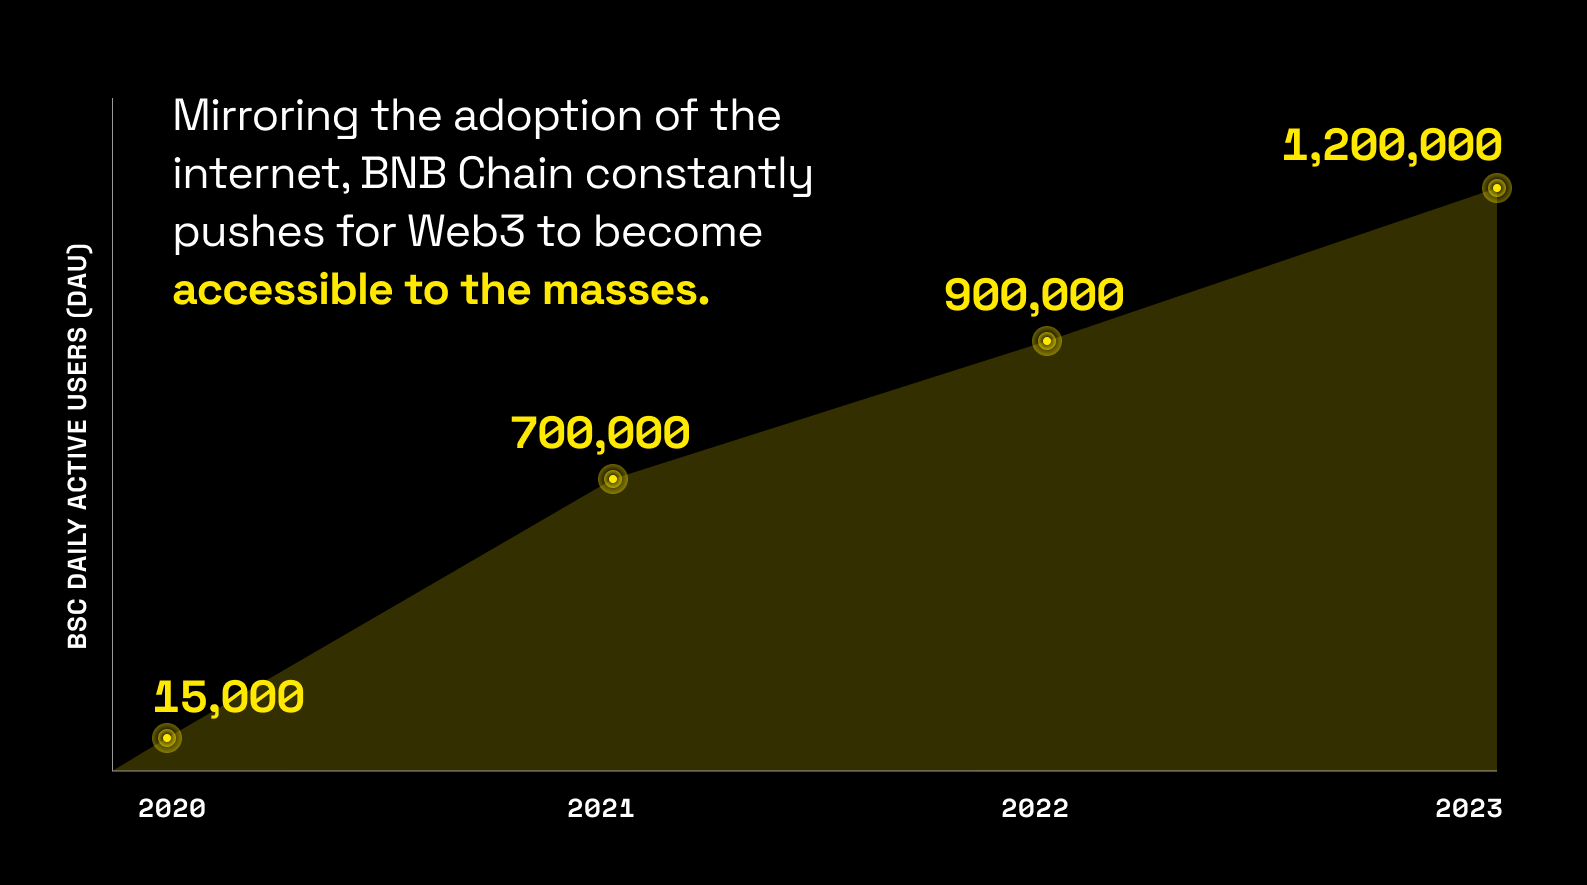 BNB Chain surpasses 1 million daily active users mark